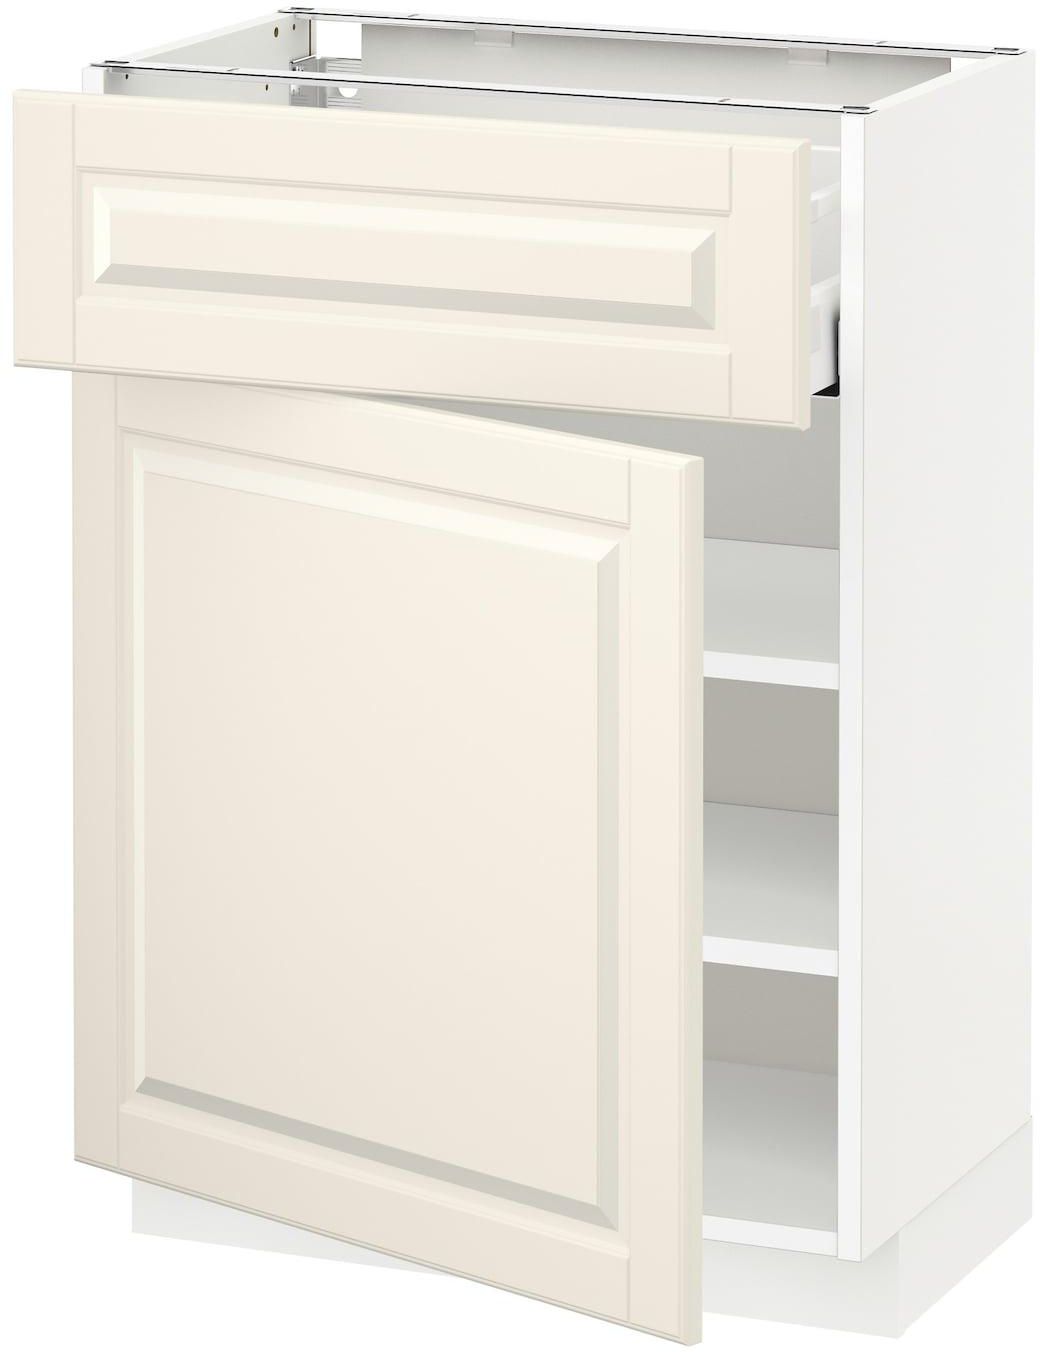 METOD / MAXIMERA Base cabinet with drawer/door - white/Bodbyn off-white 60x37 cm